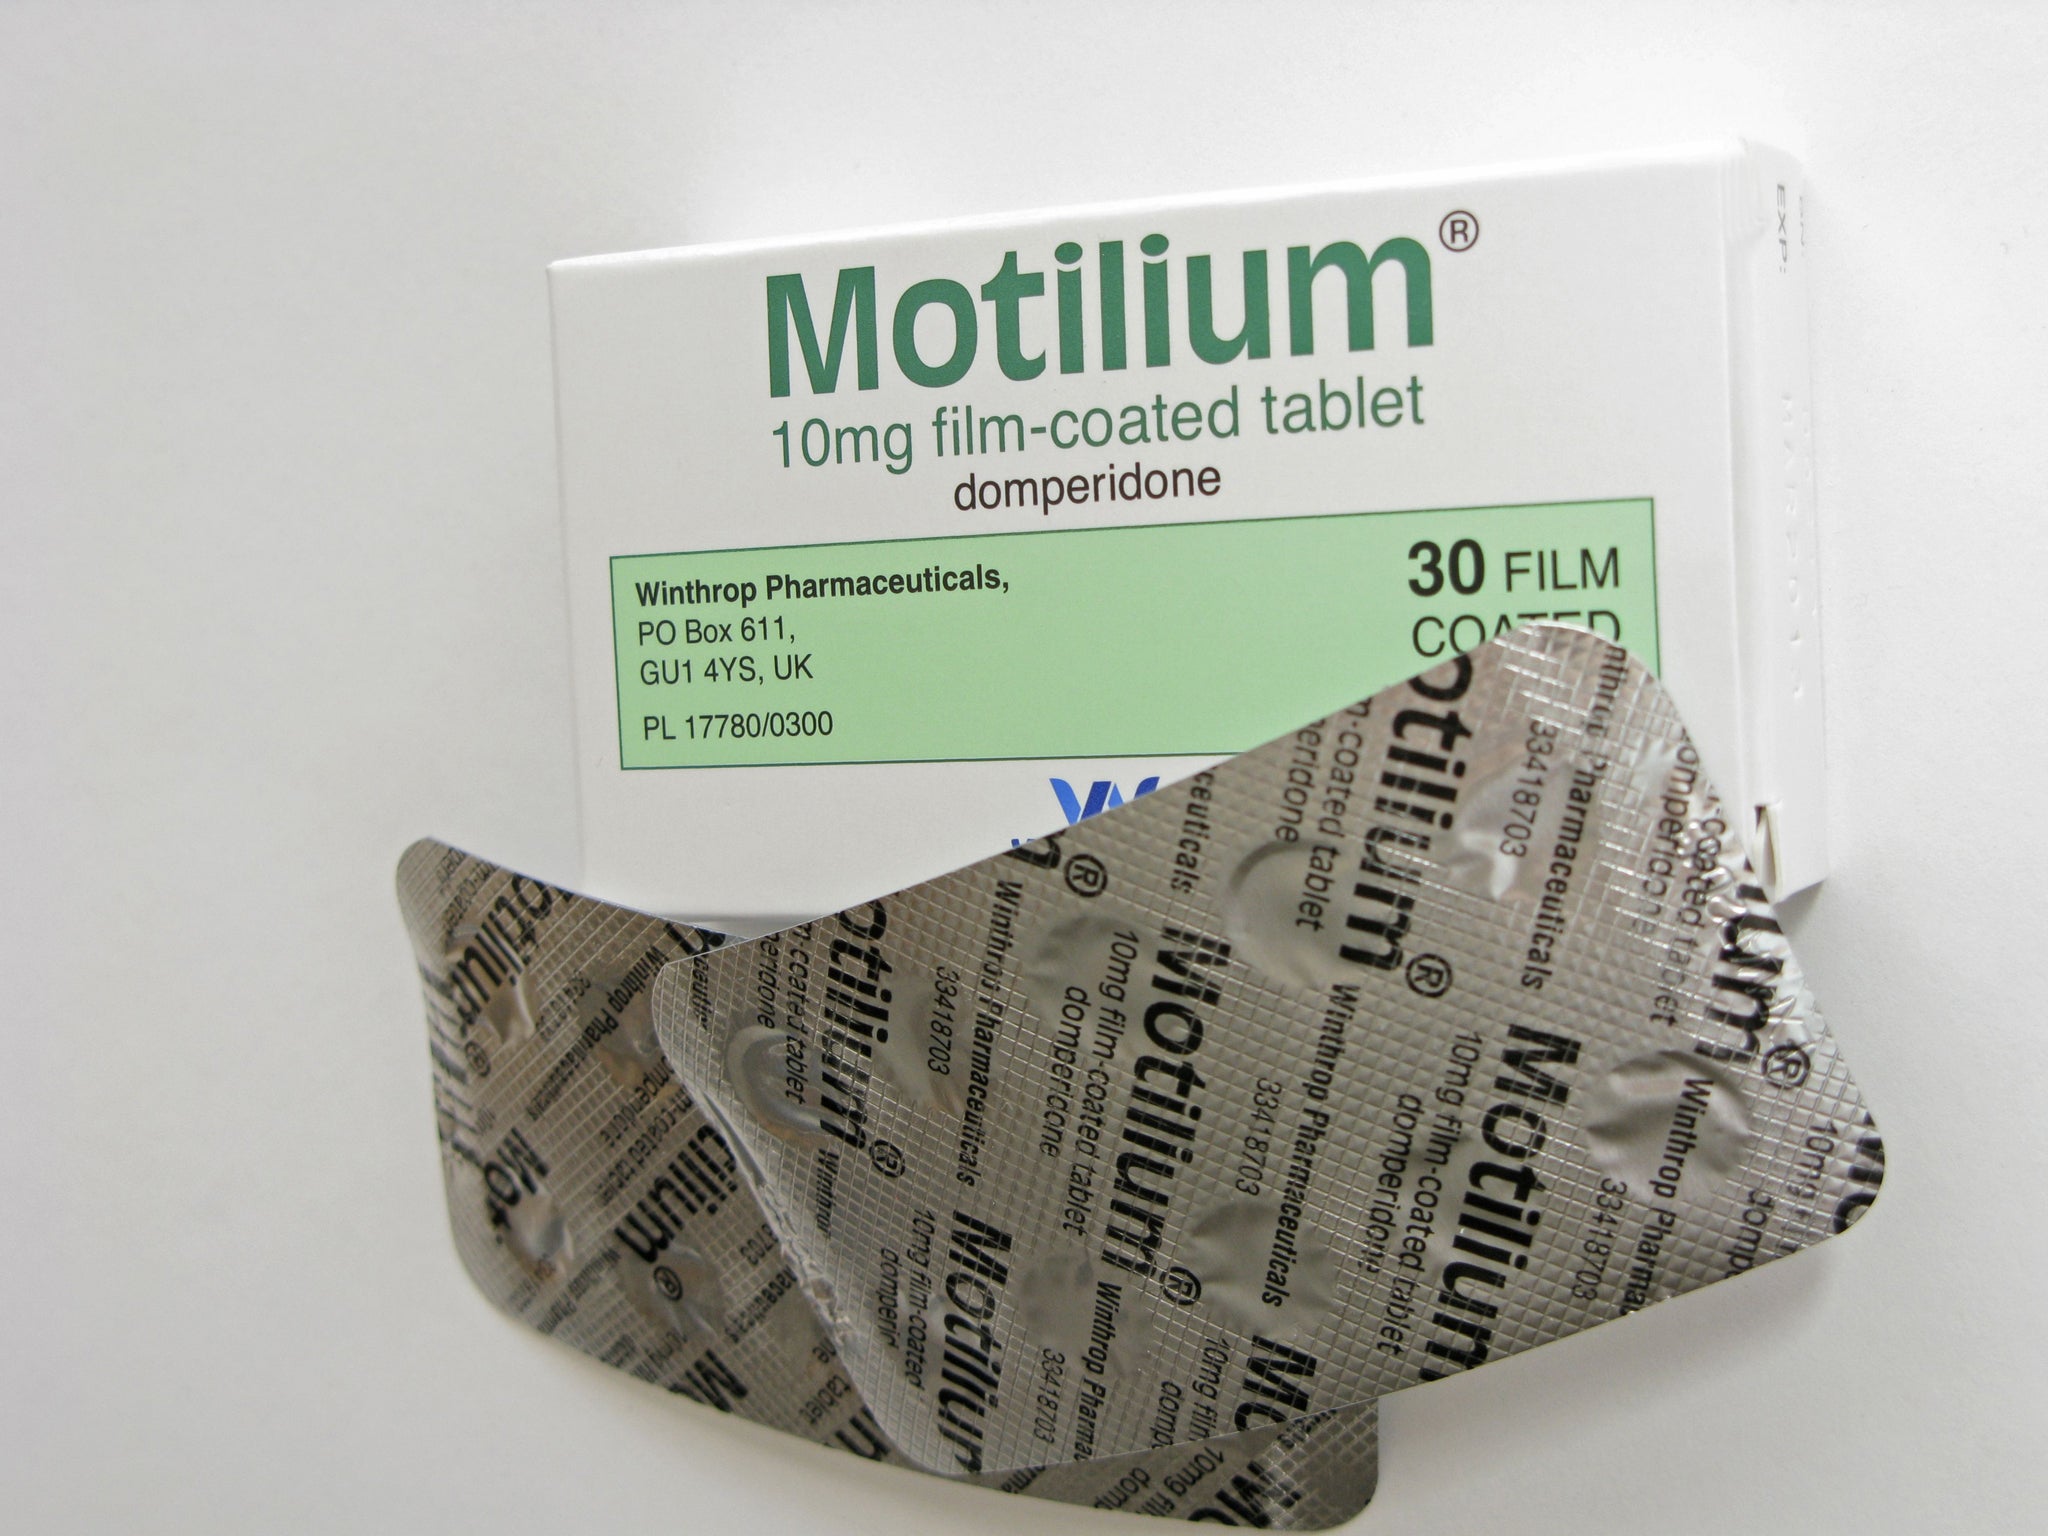 Motilium, which contains domperidone, can be found in British chemists